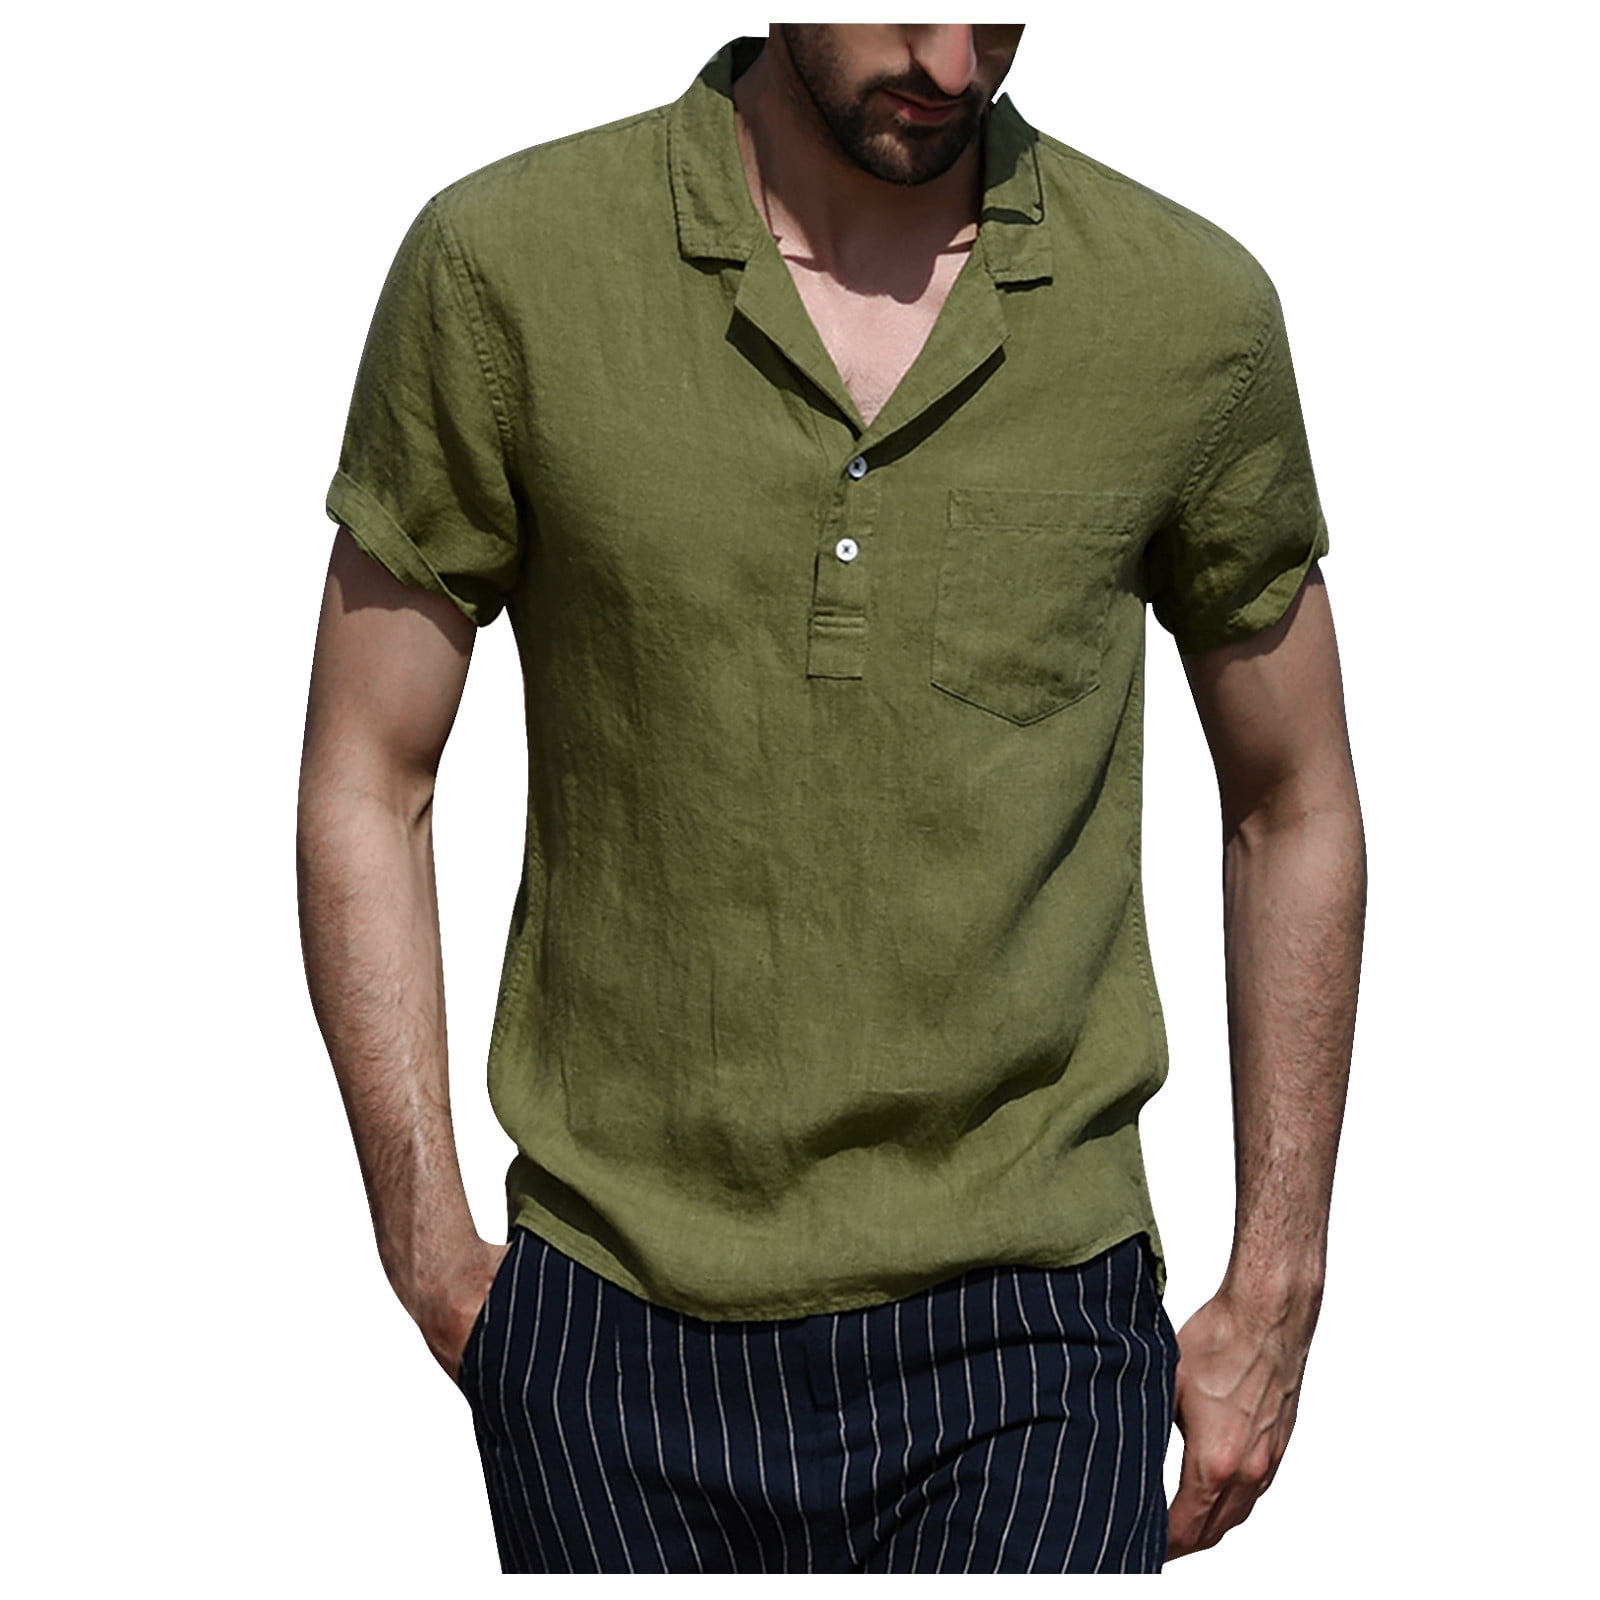 Best all-purpose travel shirts? Looking for a solid short-sleeve  button-down, and slim-fit v-neck in synthetic material. : r/onebag